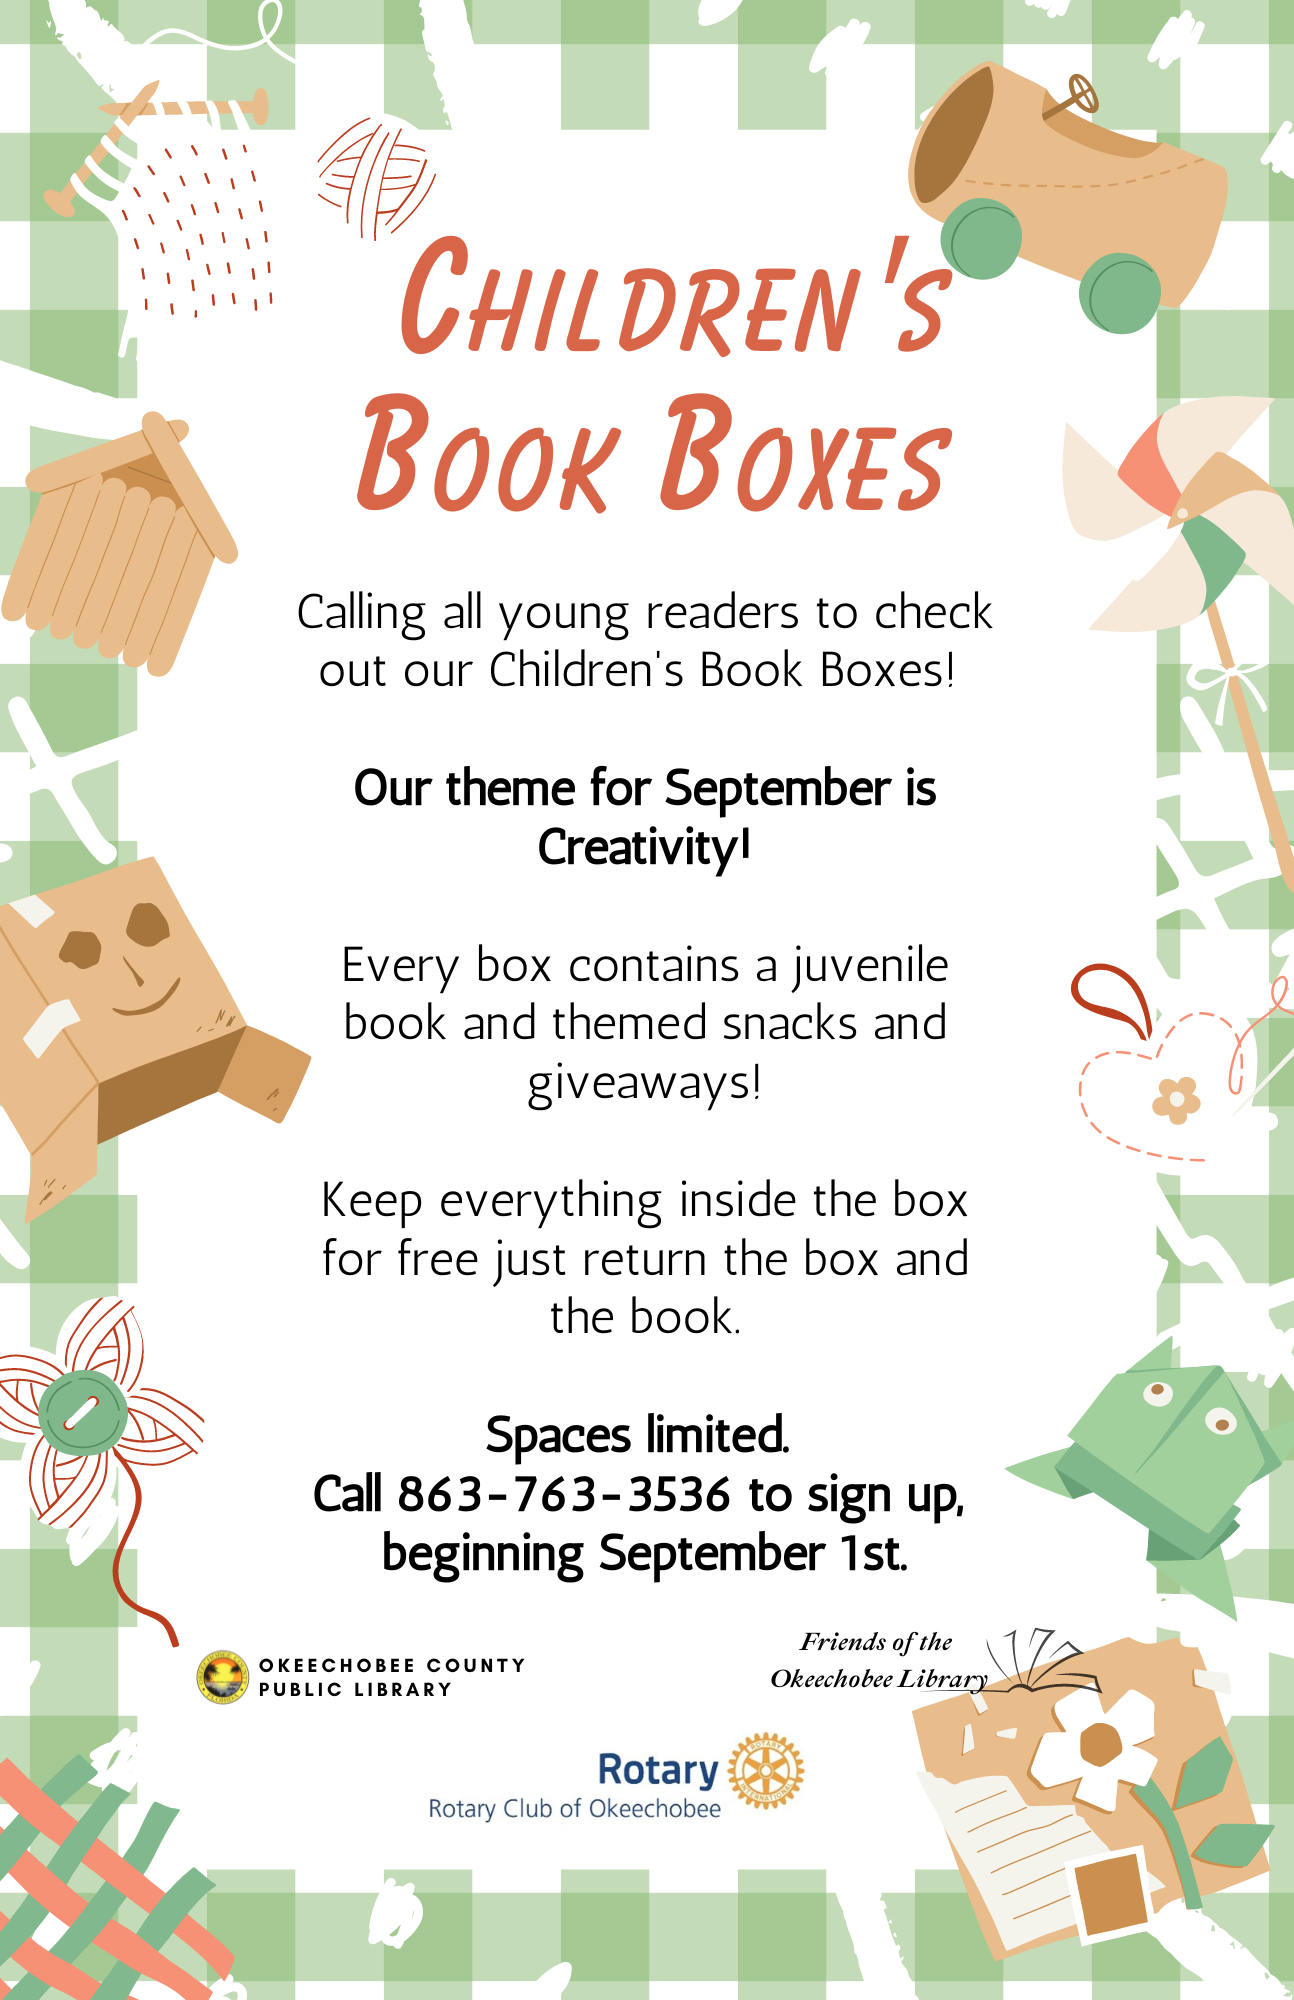 Every box contains a juvenile book and themed snacks and giveaways!